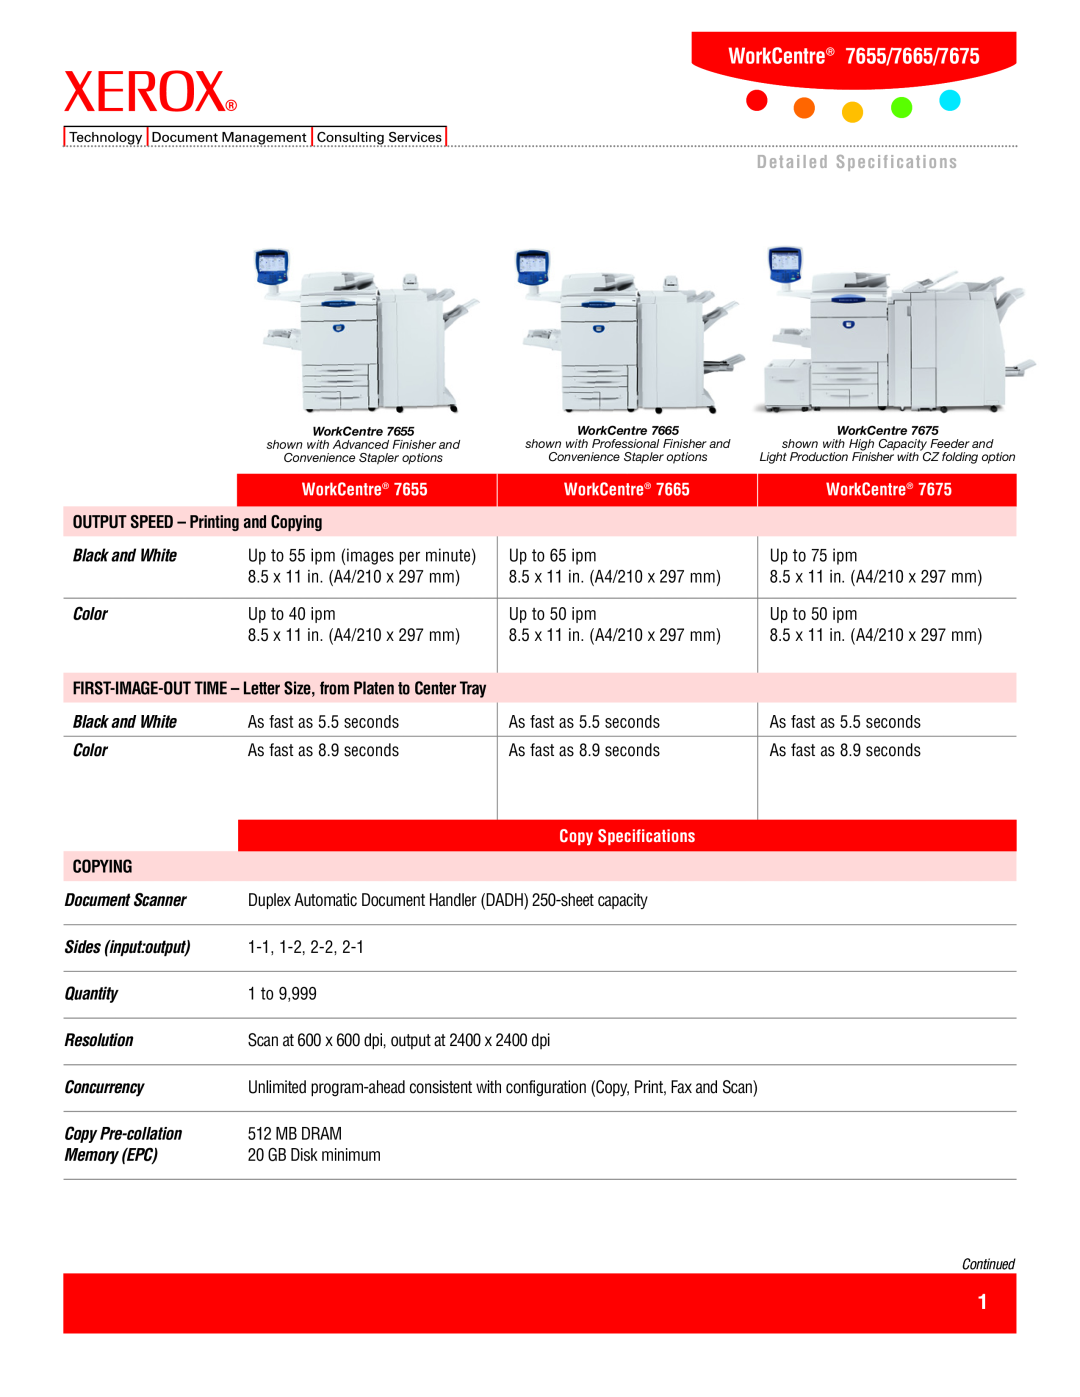 Xerox specifications WorkCentre 7655/7665/7675, WorkCentreWorkCentre 7655, OUTPUT SPEED – Printingp and cCopying 